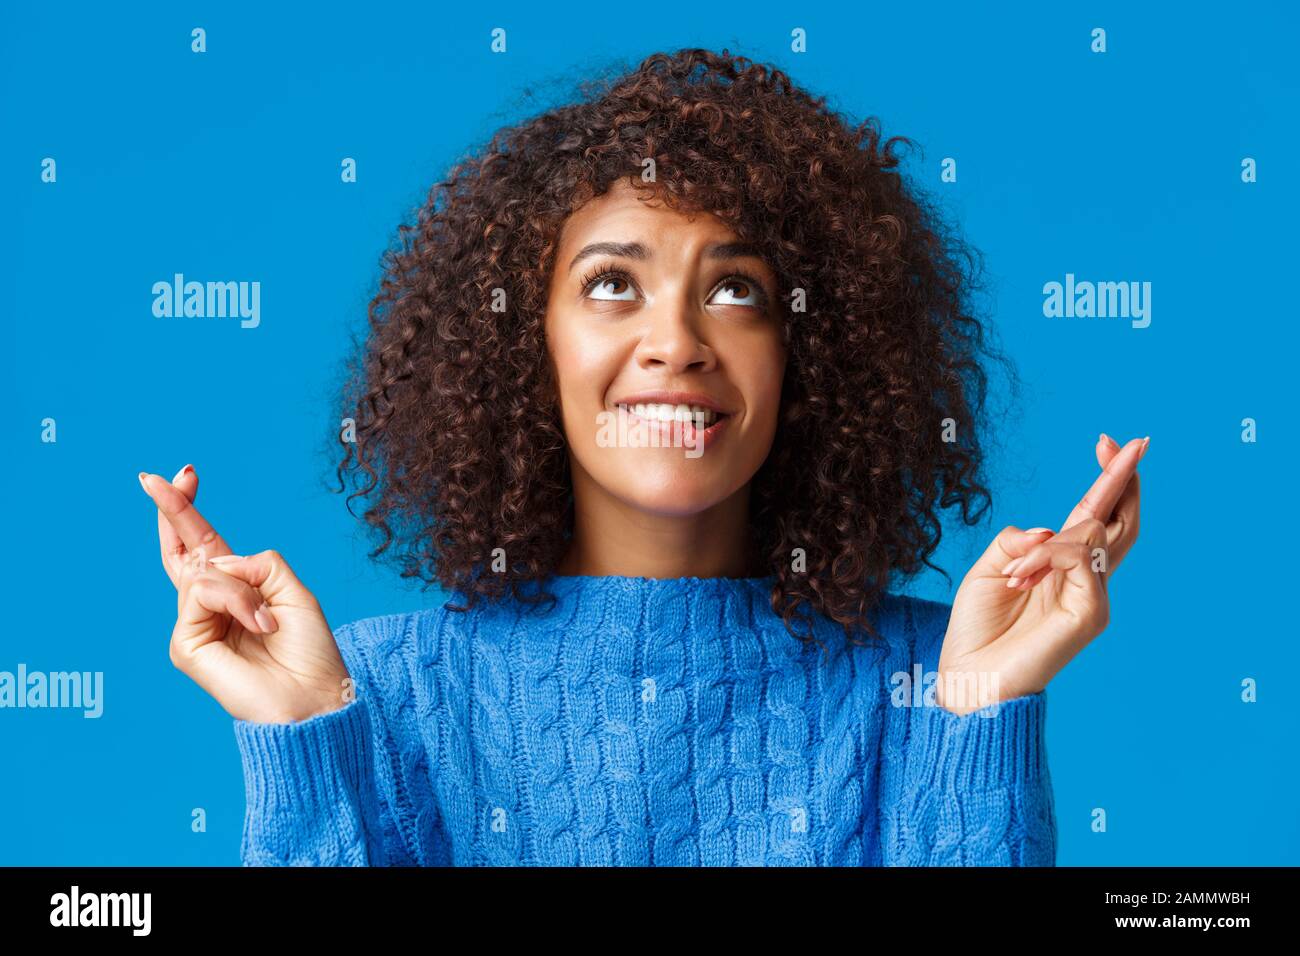 Girl begging god her dream come true. Cute and silly african-american curly-haired female with afro haircut, biting lip from temptation and desire Stock Photo